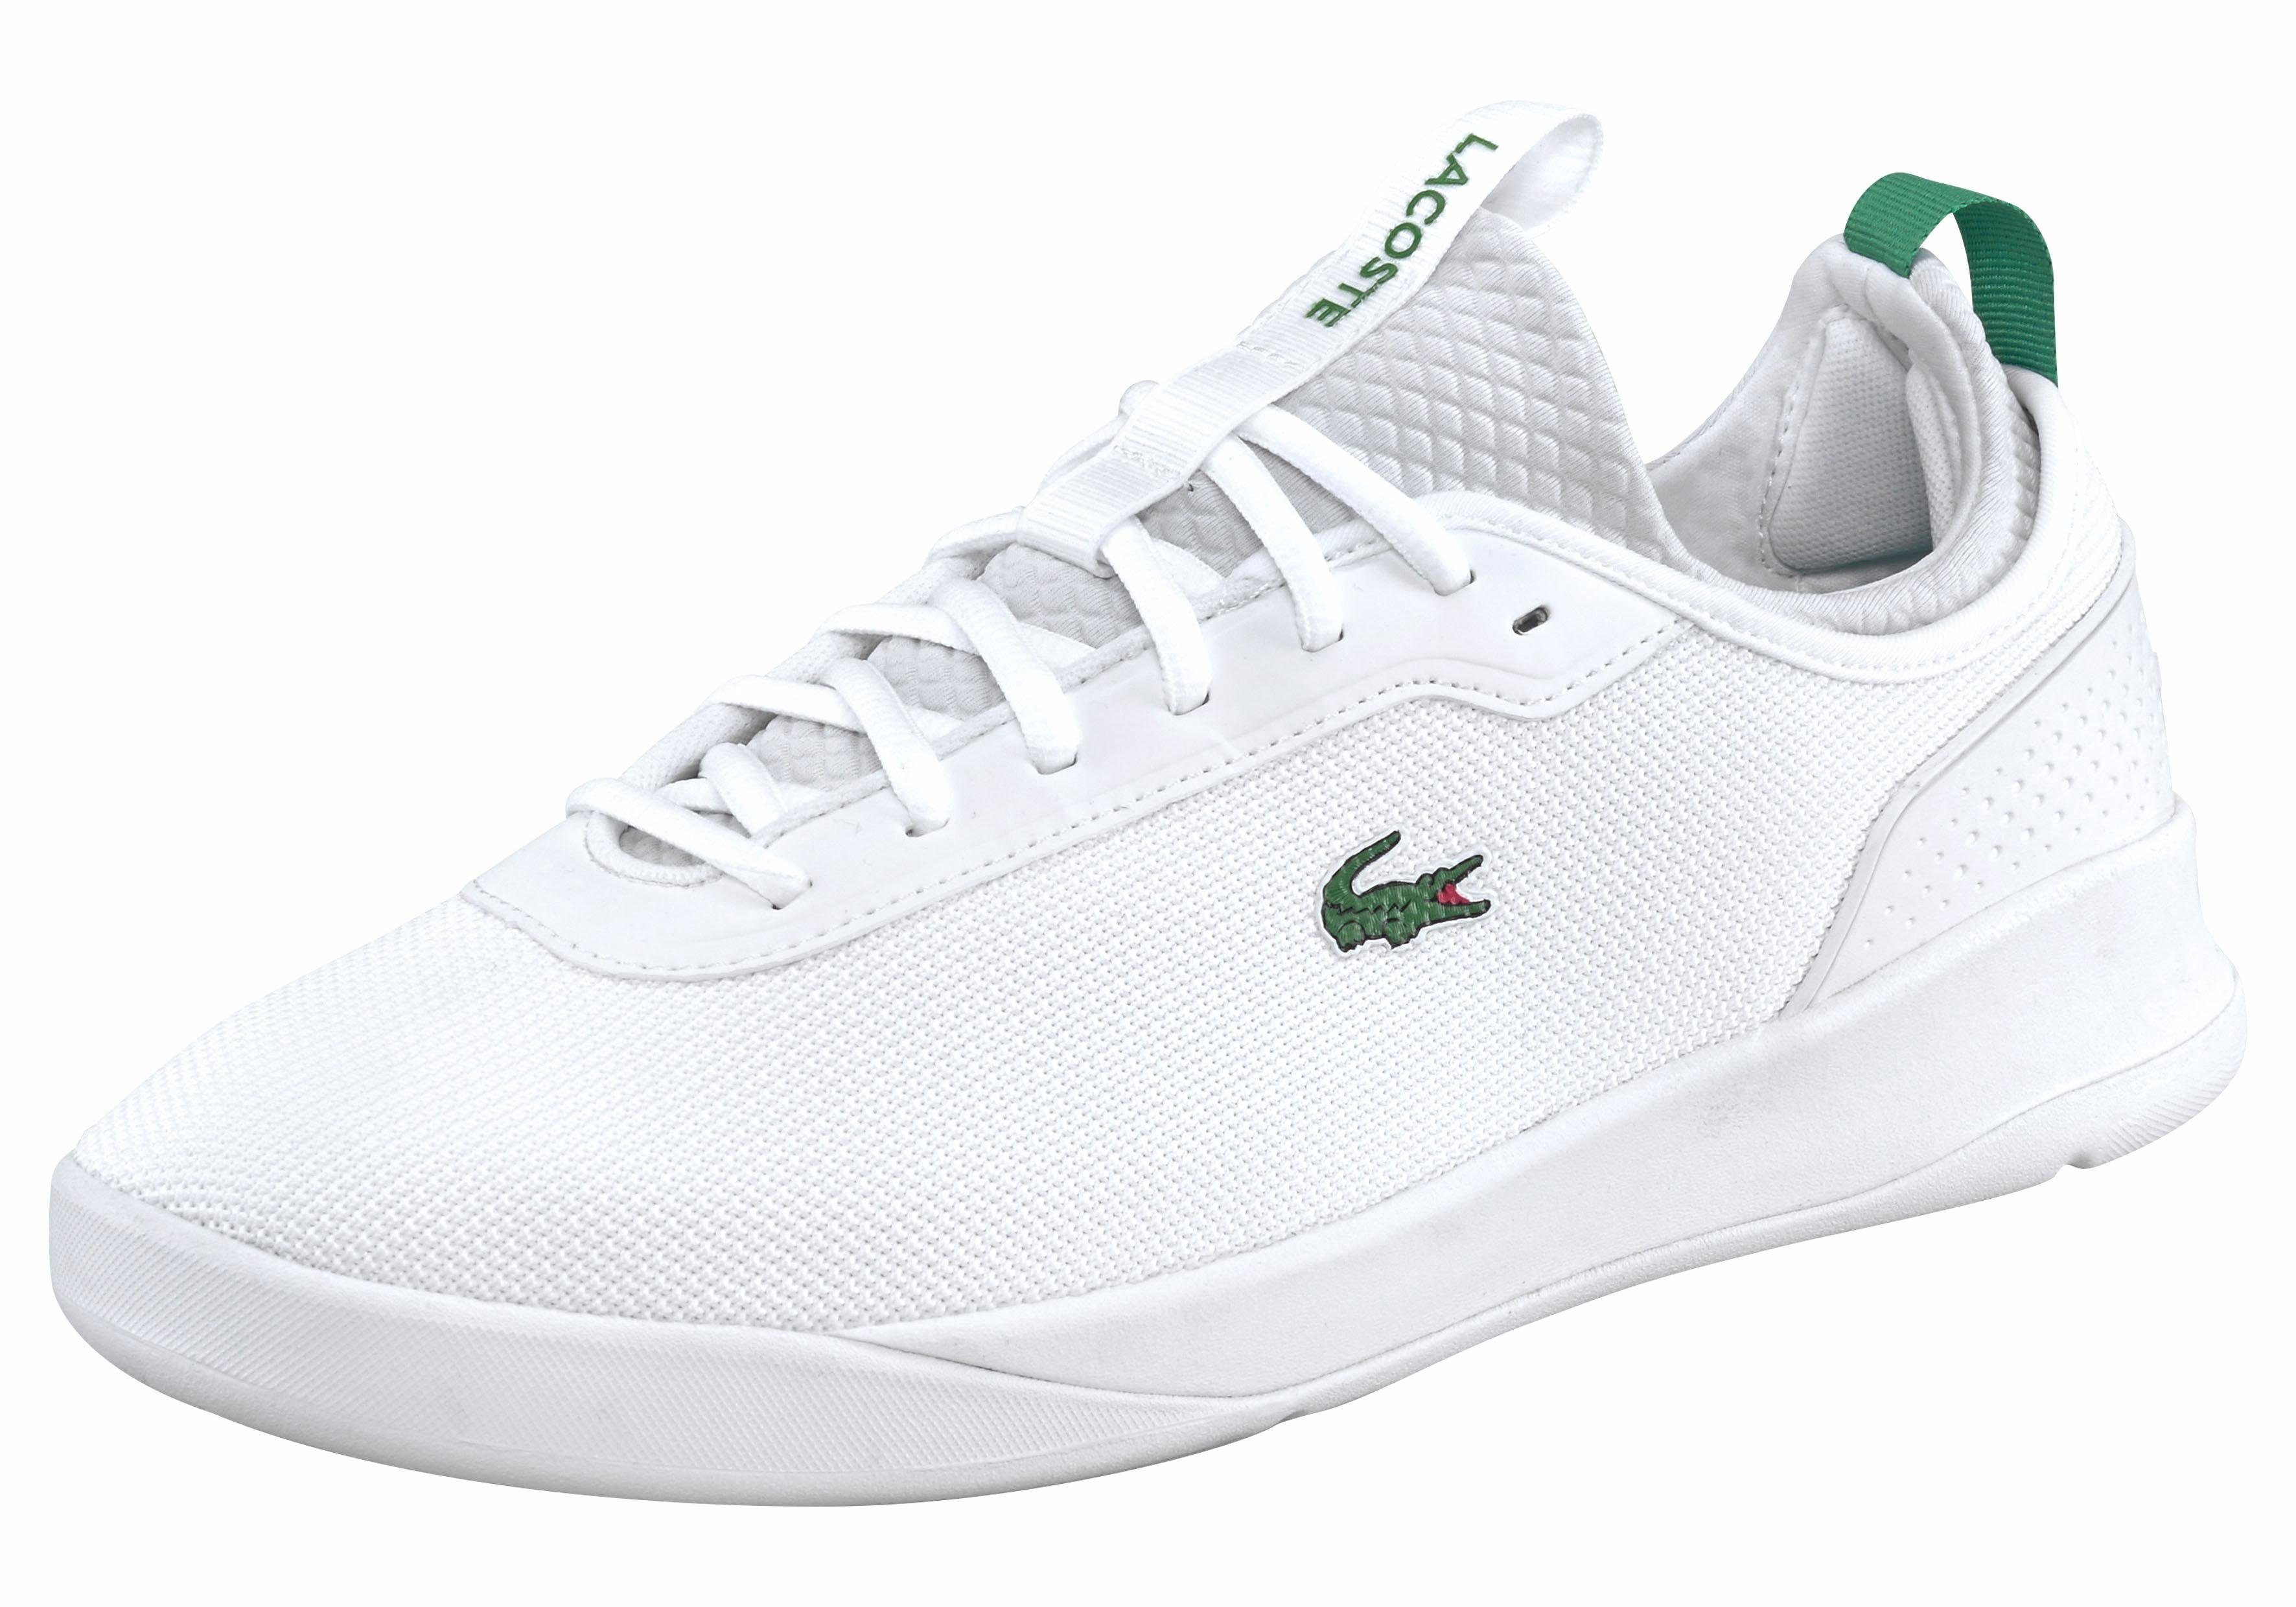 Otto - Lacoste NU 15% KORTING: Lacoste sneakers LT spirit 2.0